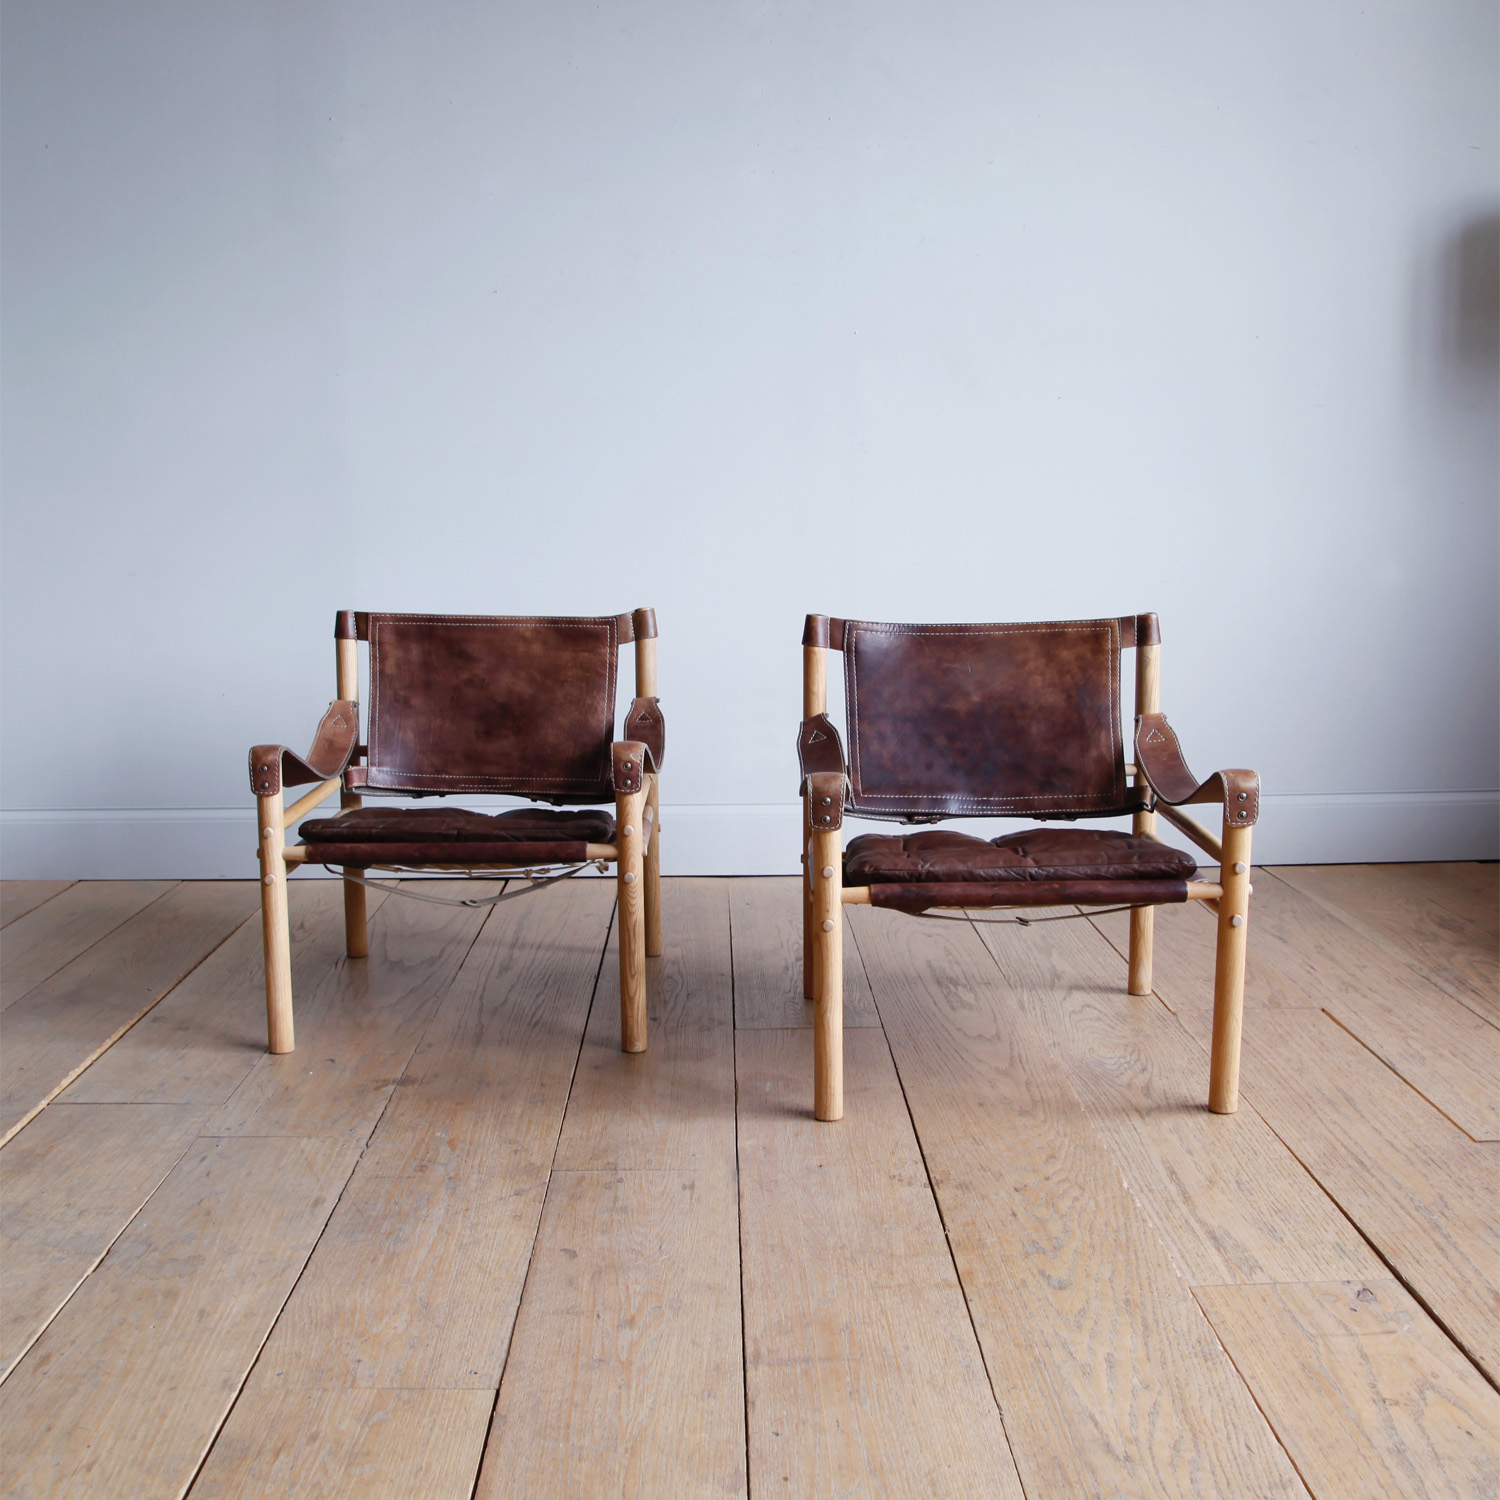 Pair of Arne Norell "Scirocco" Safari Chairs